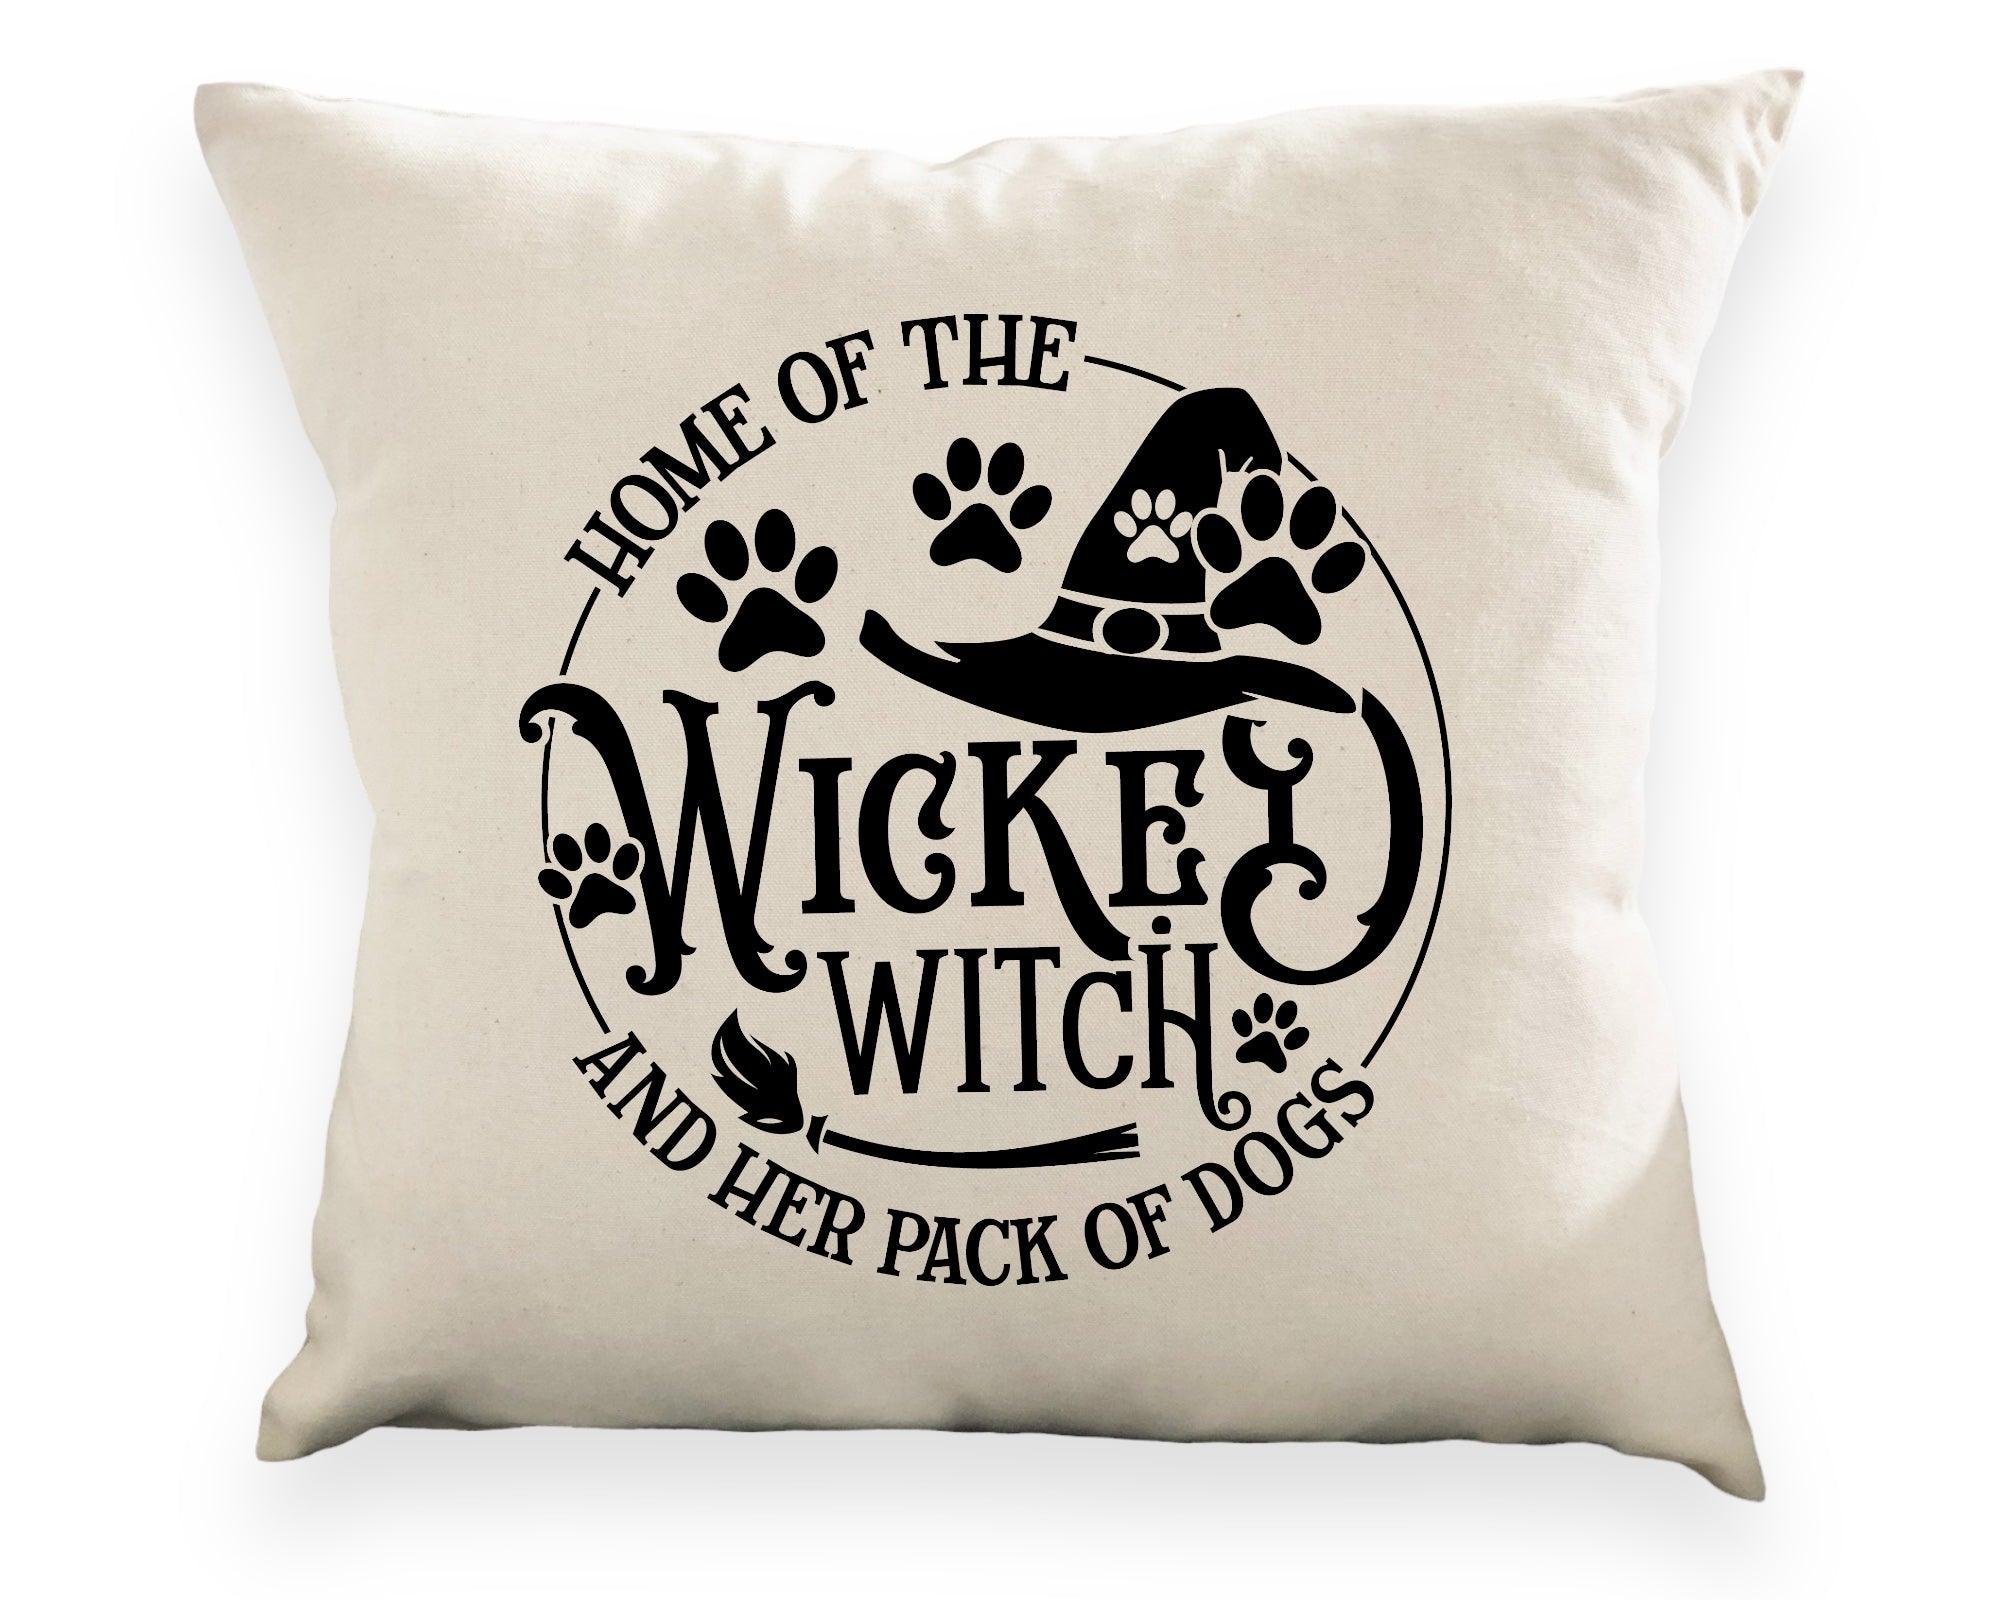 Wagging and Tagging LLC Home of the Wickey witch- Pillow cover